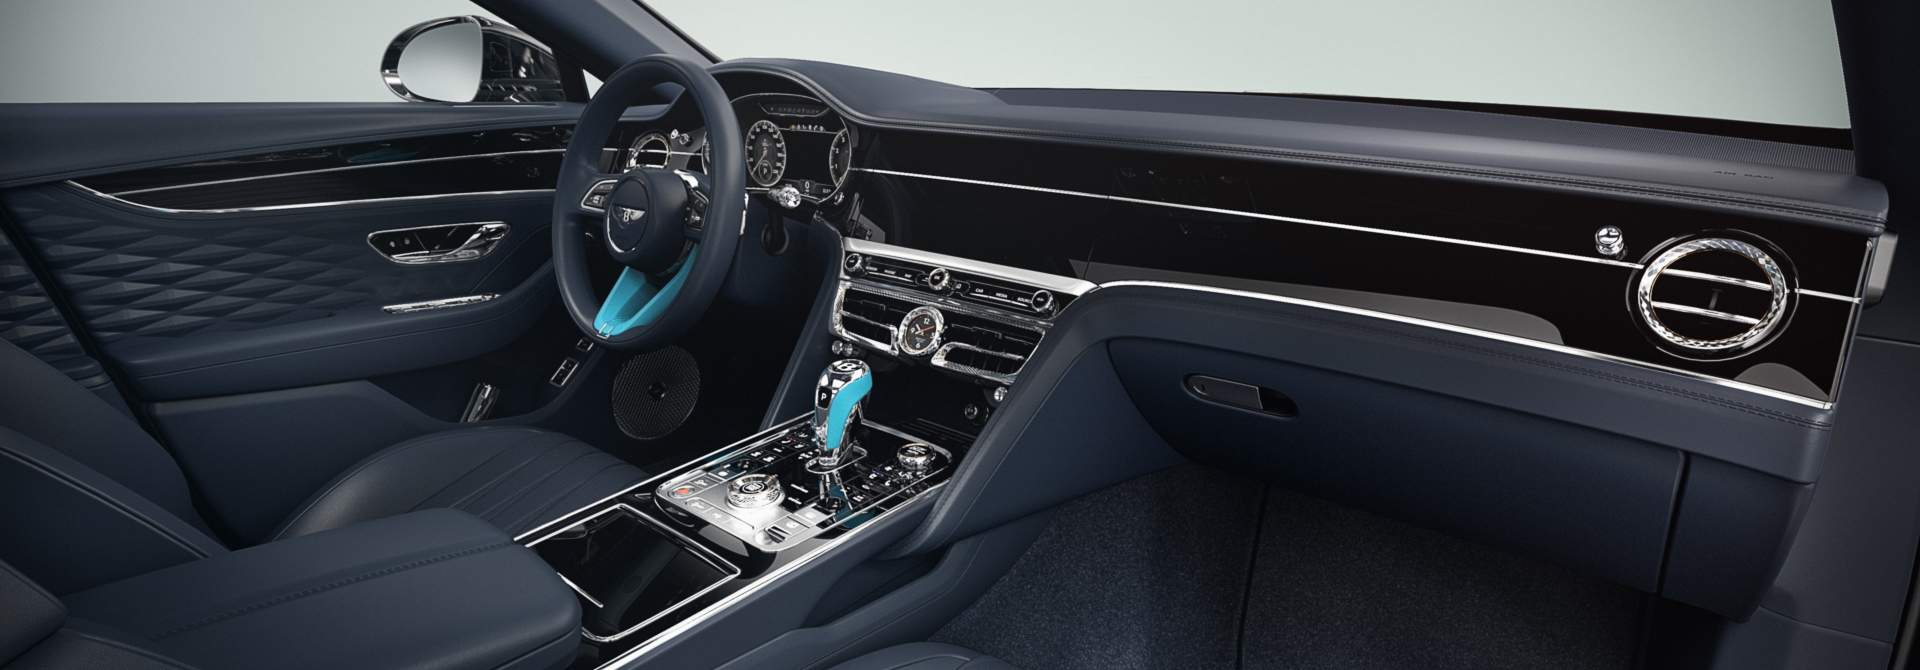 MULLINER COLOUR SPECIFICATION _ Section Image 1920x670.jpg